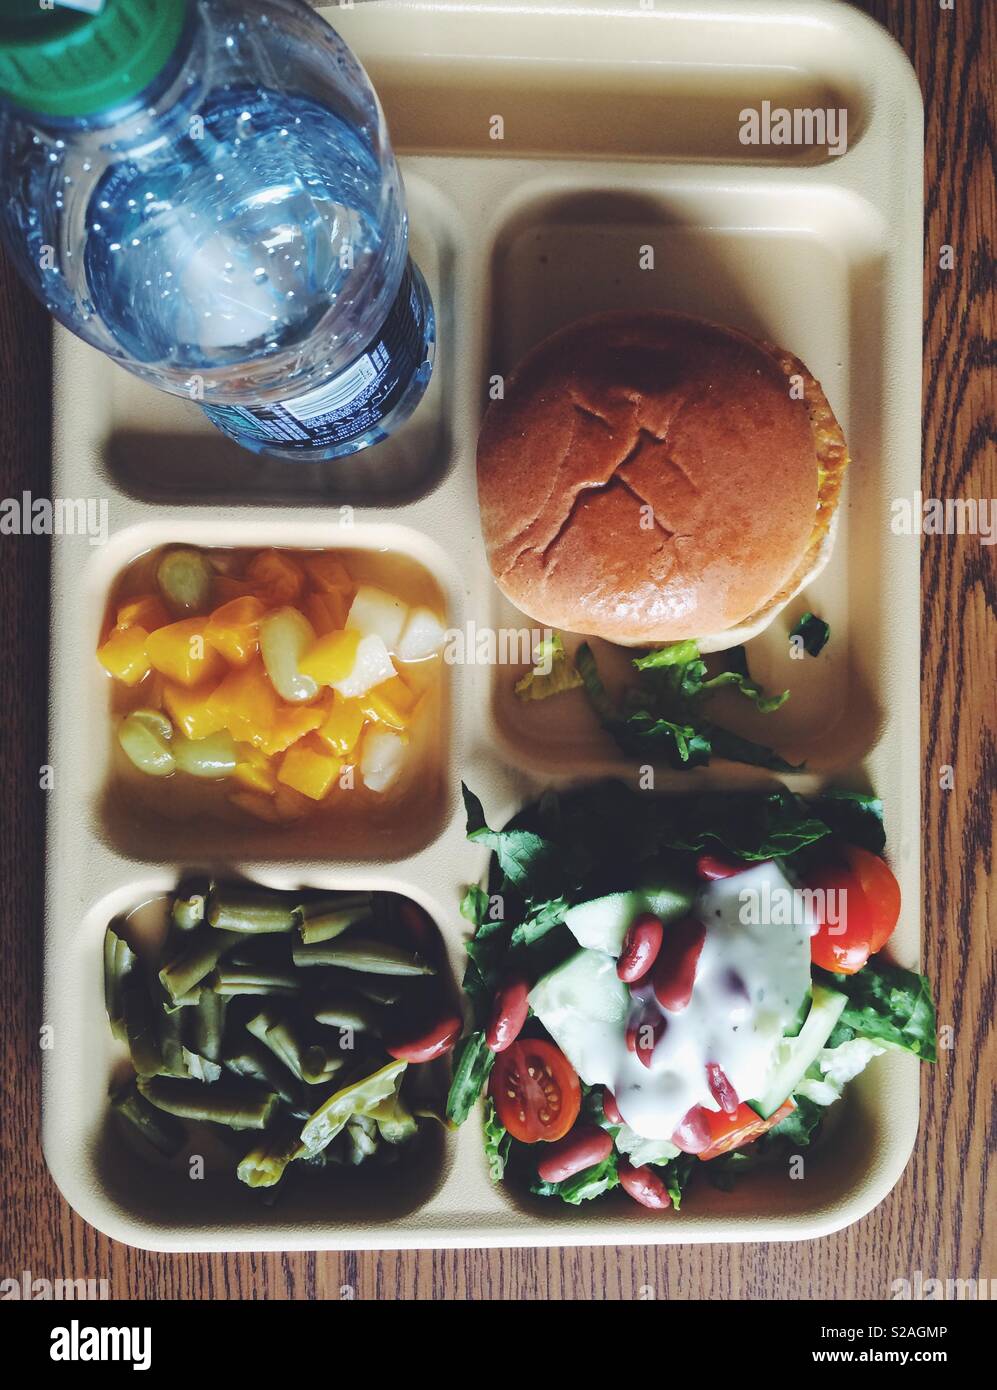 School cafeteria lunch Stock Photo